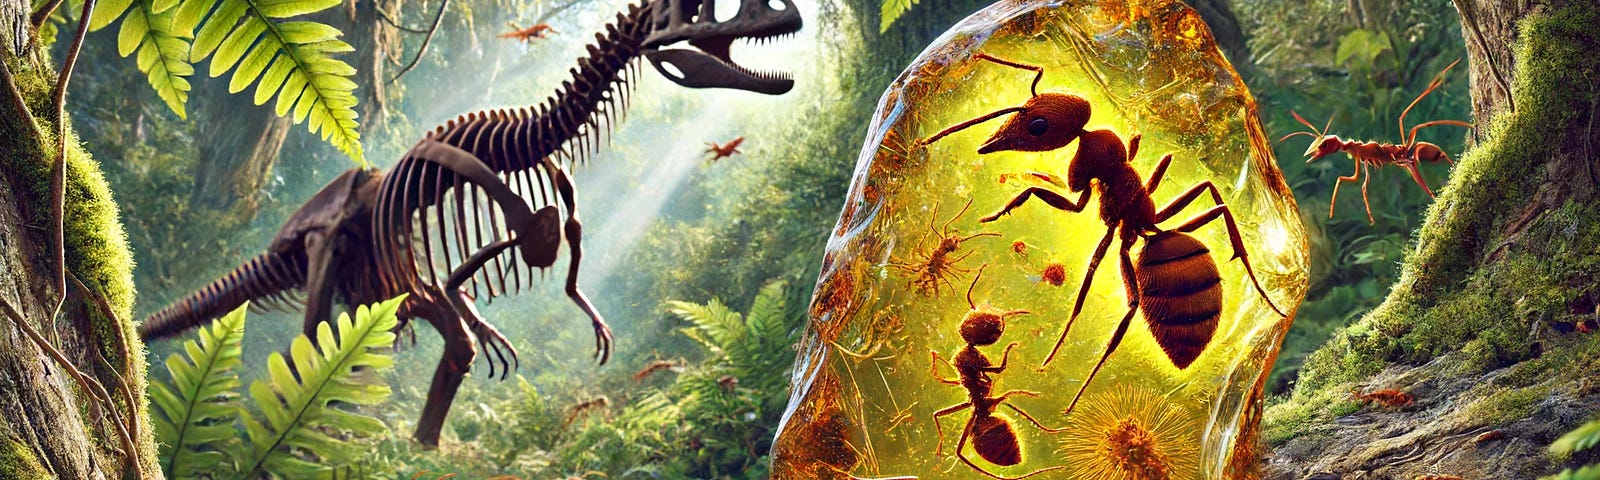 A realistic depiction of a prehistoric scene featuring ants from 100 million years ago preserved in amber, with detailed sensory organs visible. The background shows a lush, ancient forest with diverse foliage and a dinosaur in the distance. The amber is cracked open, highlighting the ants’ sensory structures, capturing the essence of the Cretaceous period